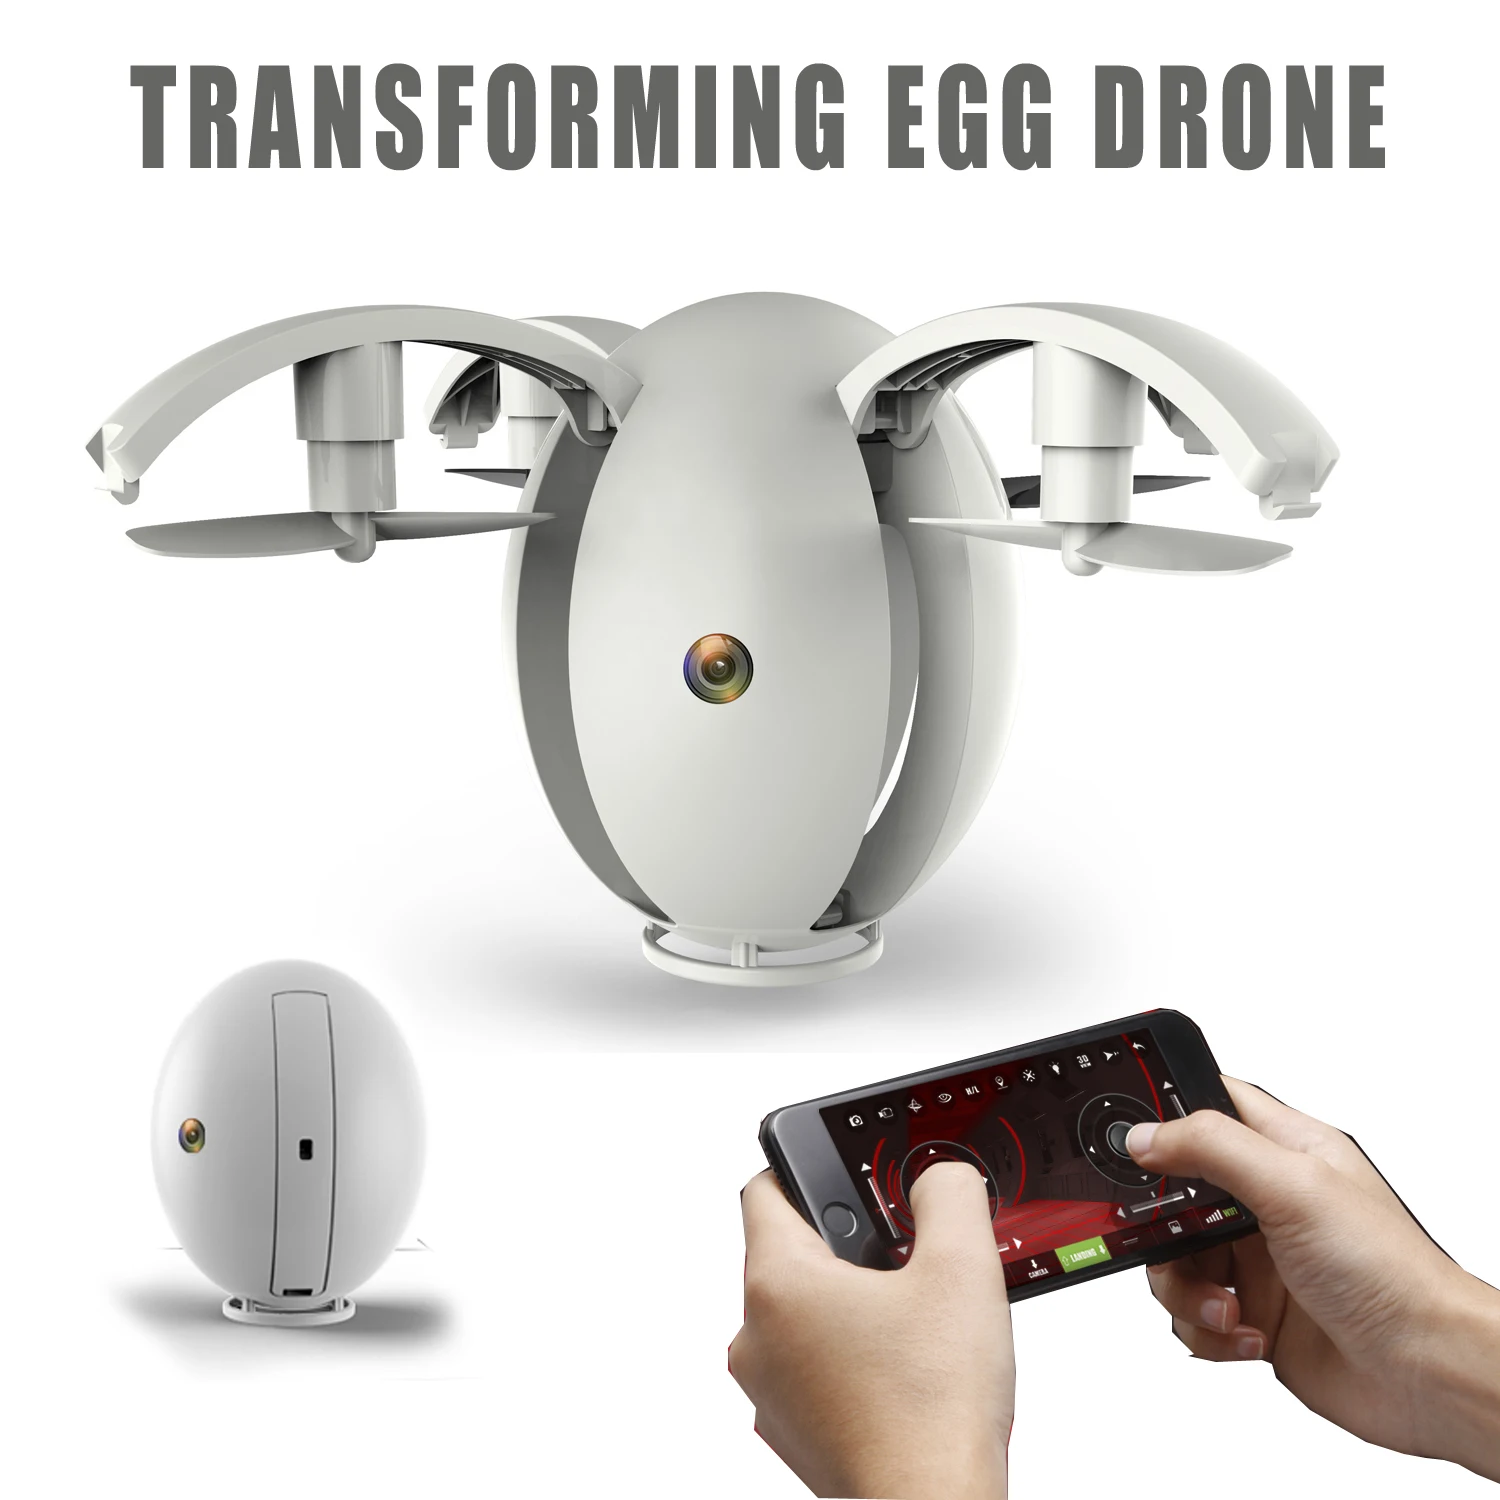 KaiDeng K130 RC Drone Foldable Transformable Egg Drone 2.4G Selfie Drone... - $37.64+